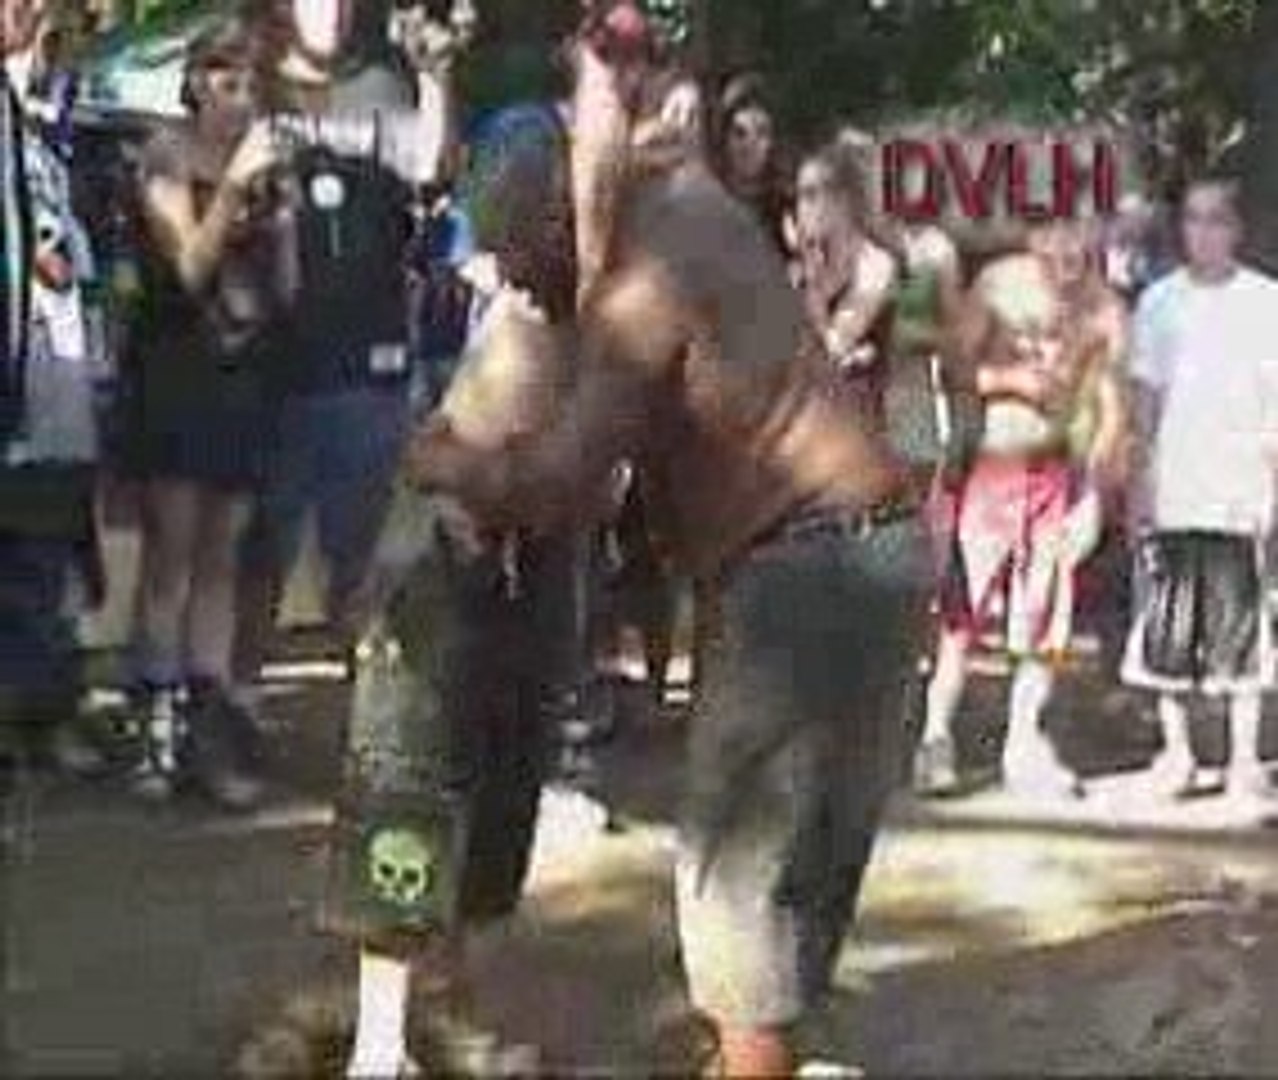 Juggalo Wrestling at the 2006 Gathering at a campsite part 2